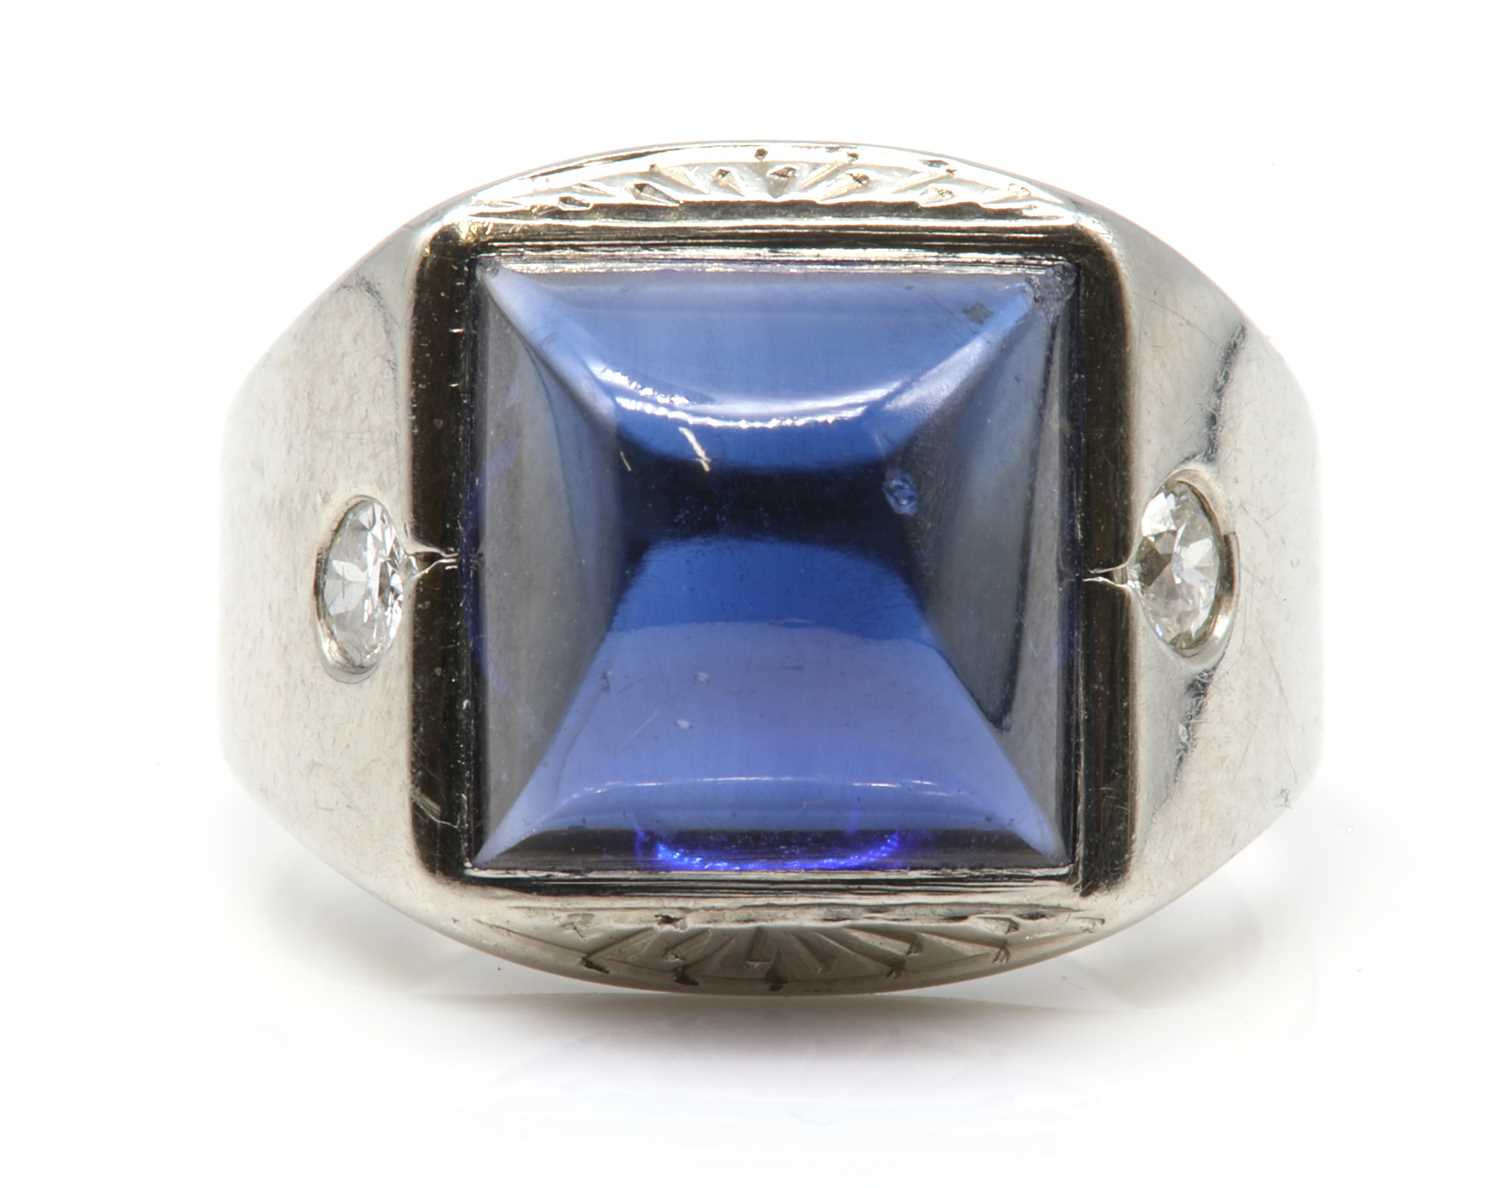 Lot 214 - An American Art Deco synthetic sapphire and diamond ring, c.1930